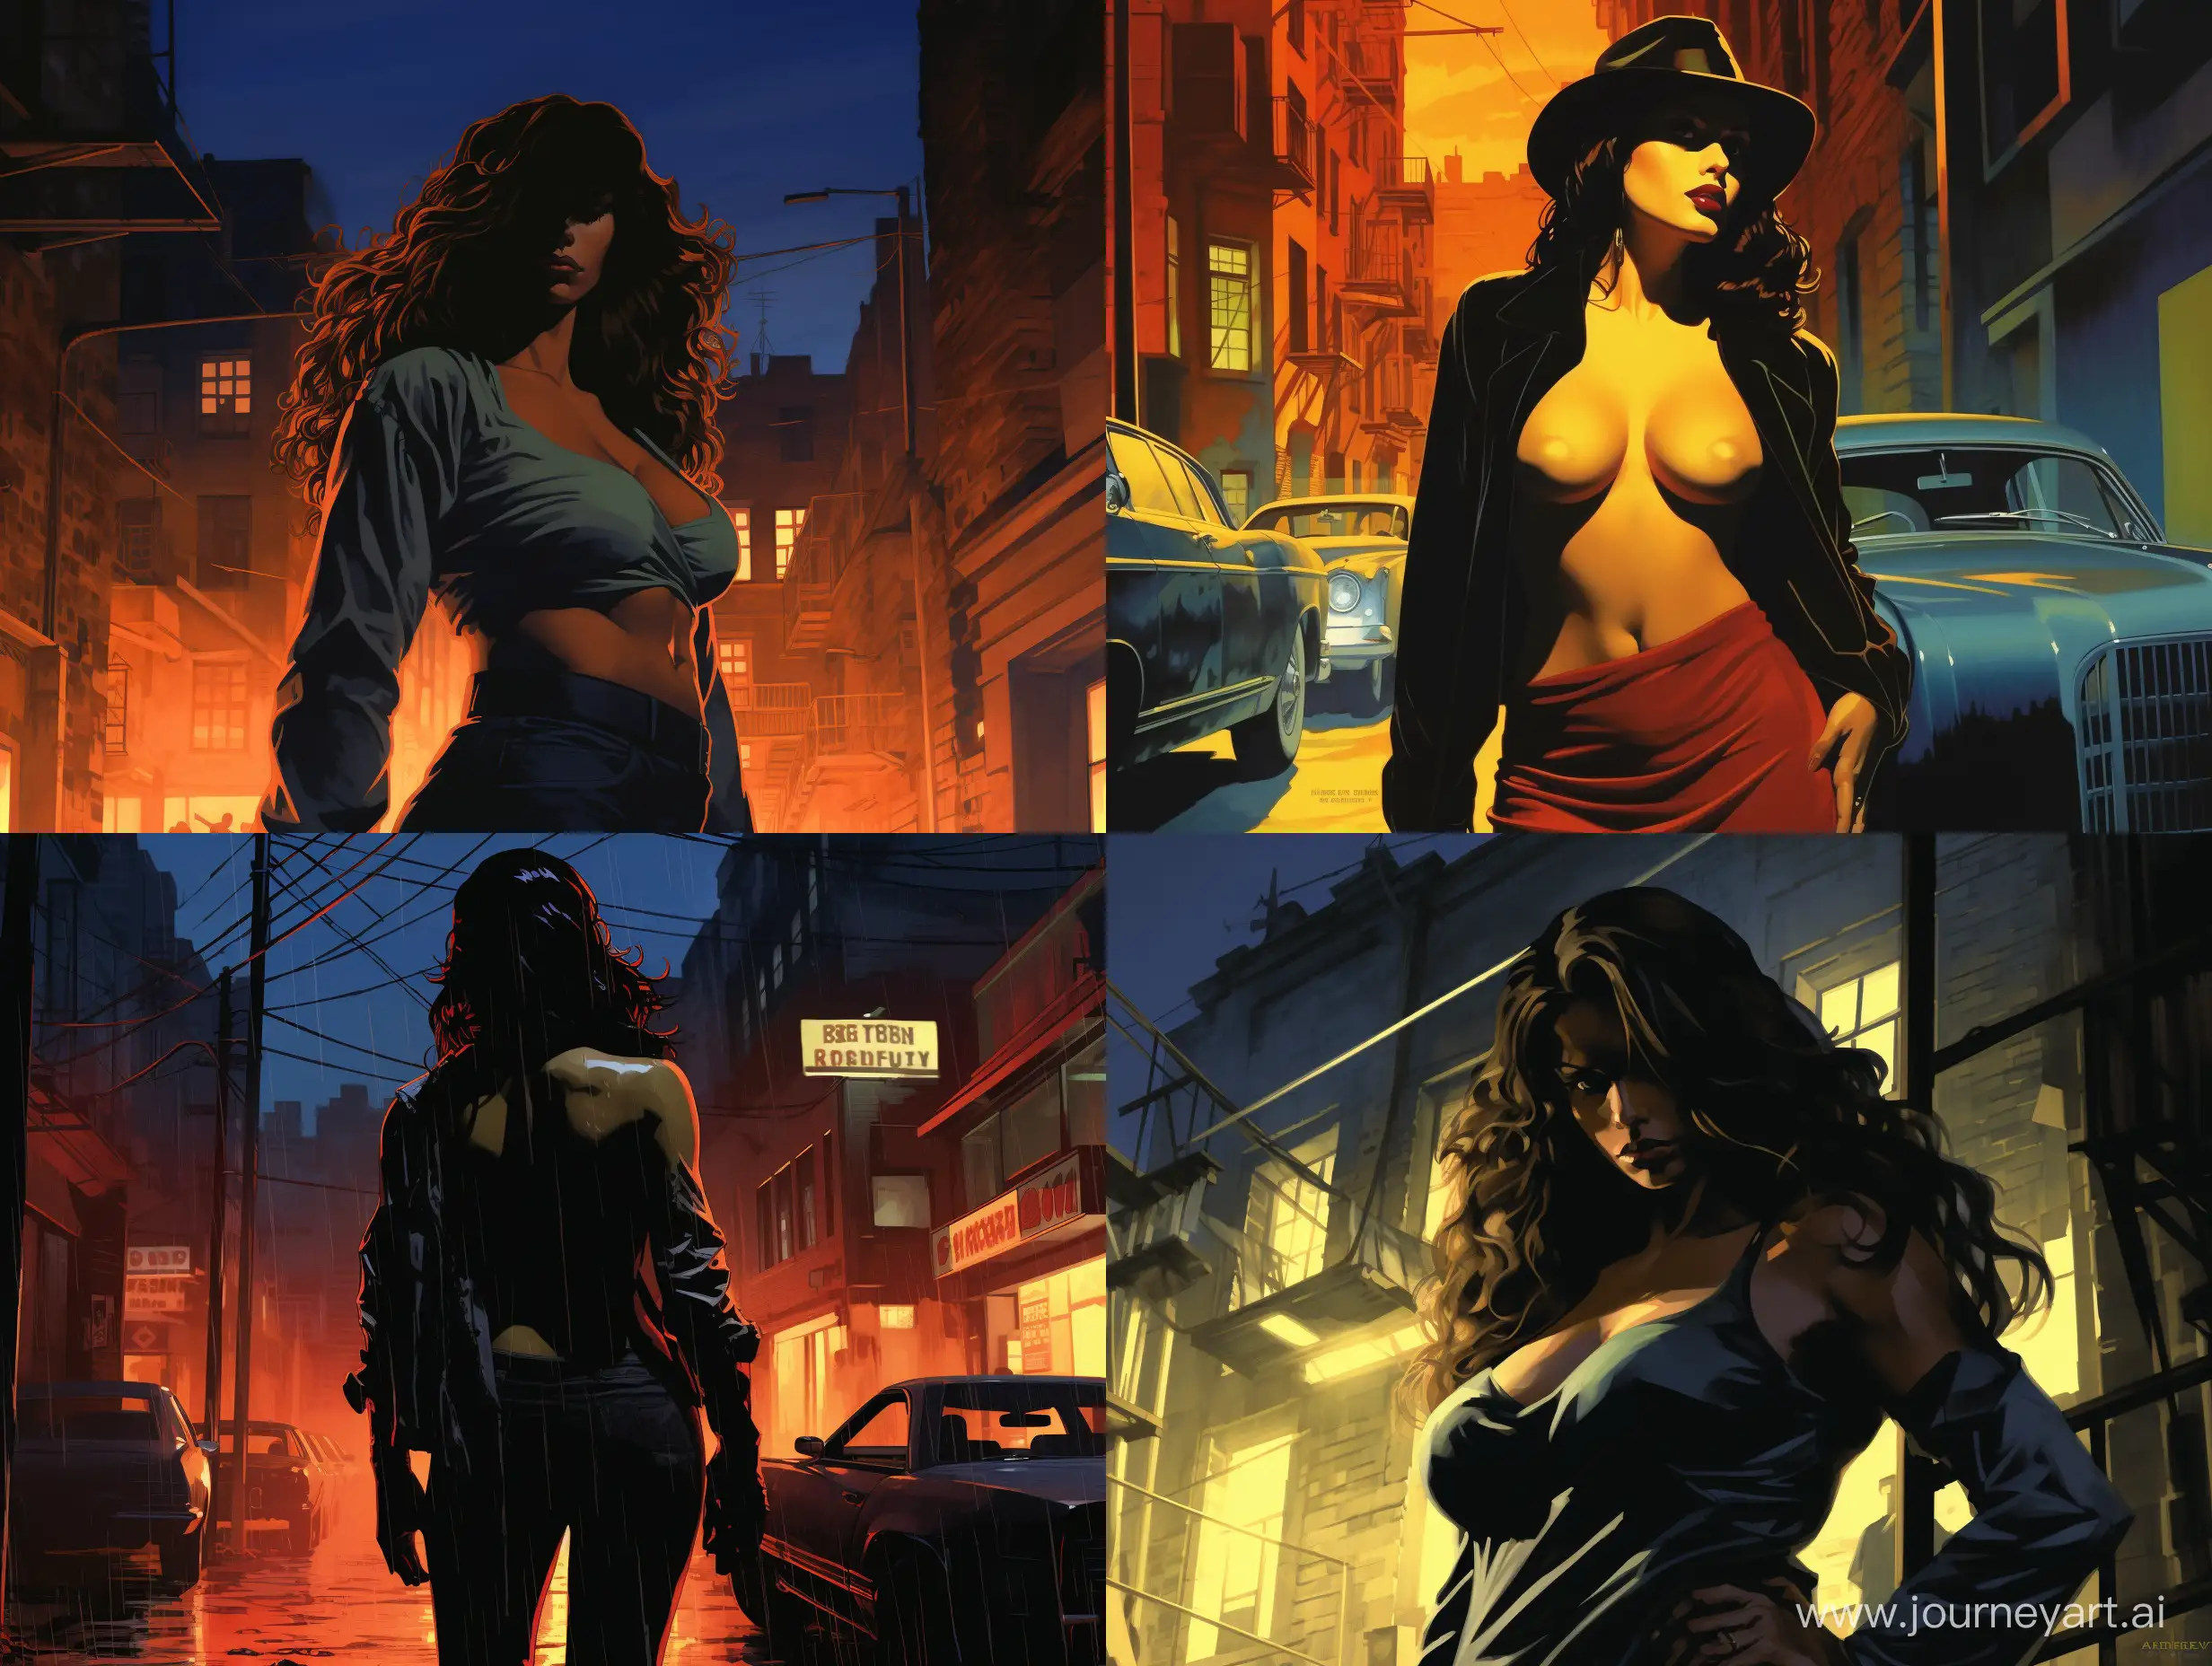 Comic book illustration, Wonder Woman, overweight physique, direct gaze, waist-up, dark alley, gritty urban vibe, dramatic lighting, high contrast, desaturated colors, film noir style, Frank Miller's "Sin City" aesthetic, reference - Alex Ross, Batman: The Dark Knight Returns, --ar 4:3